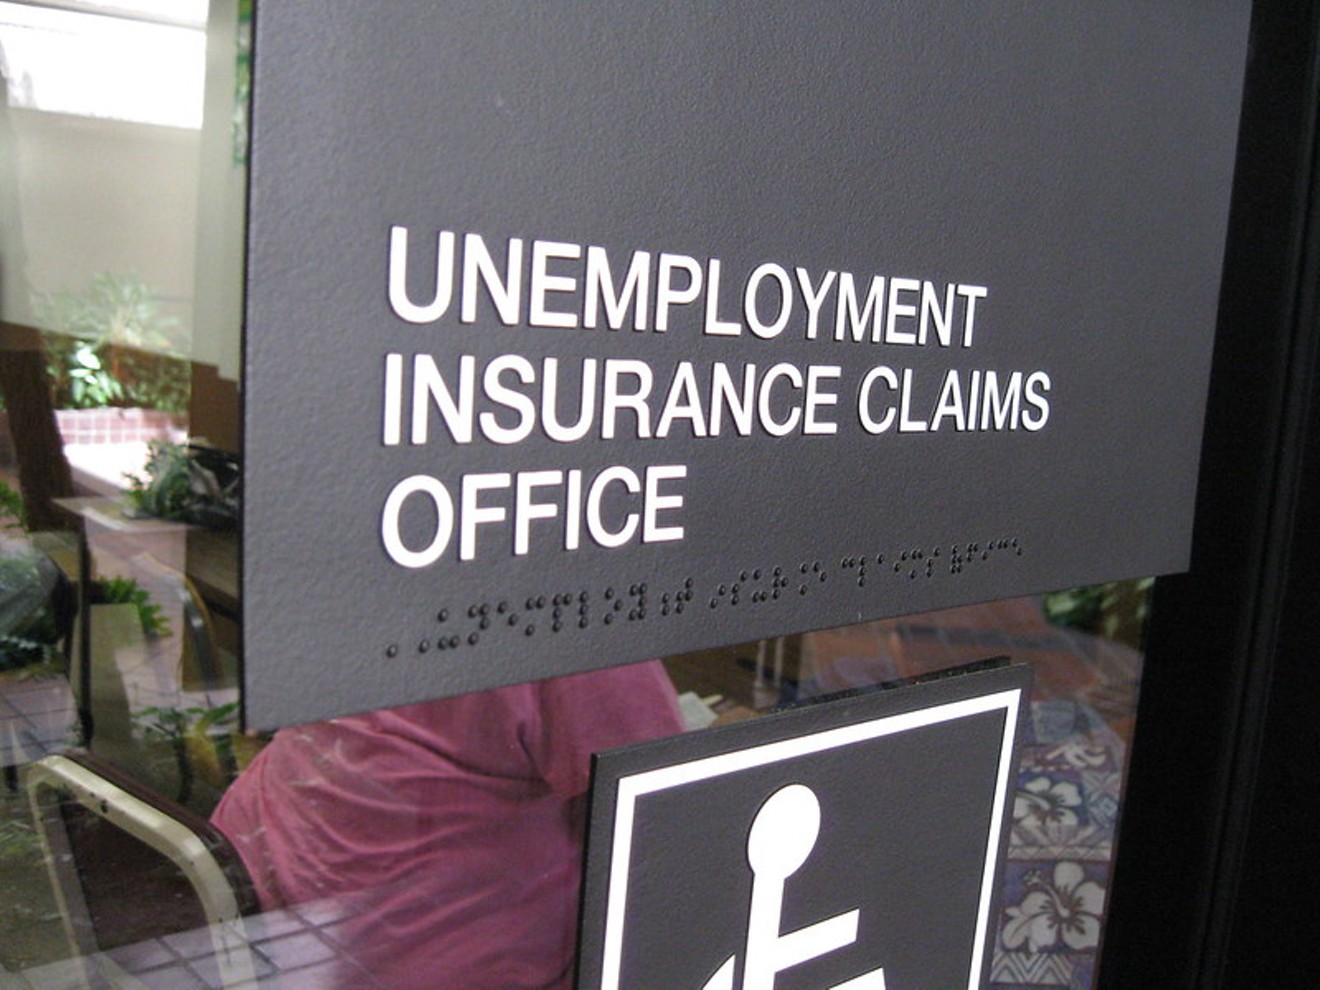 Unemployment claims skyrocketed in Texas and nationwide last week amid shutdowns related to the novel coronavirus.